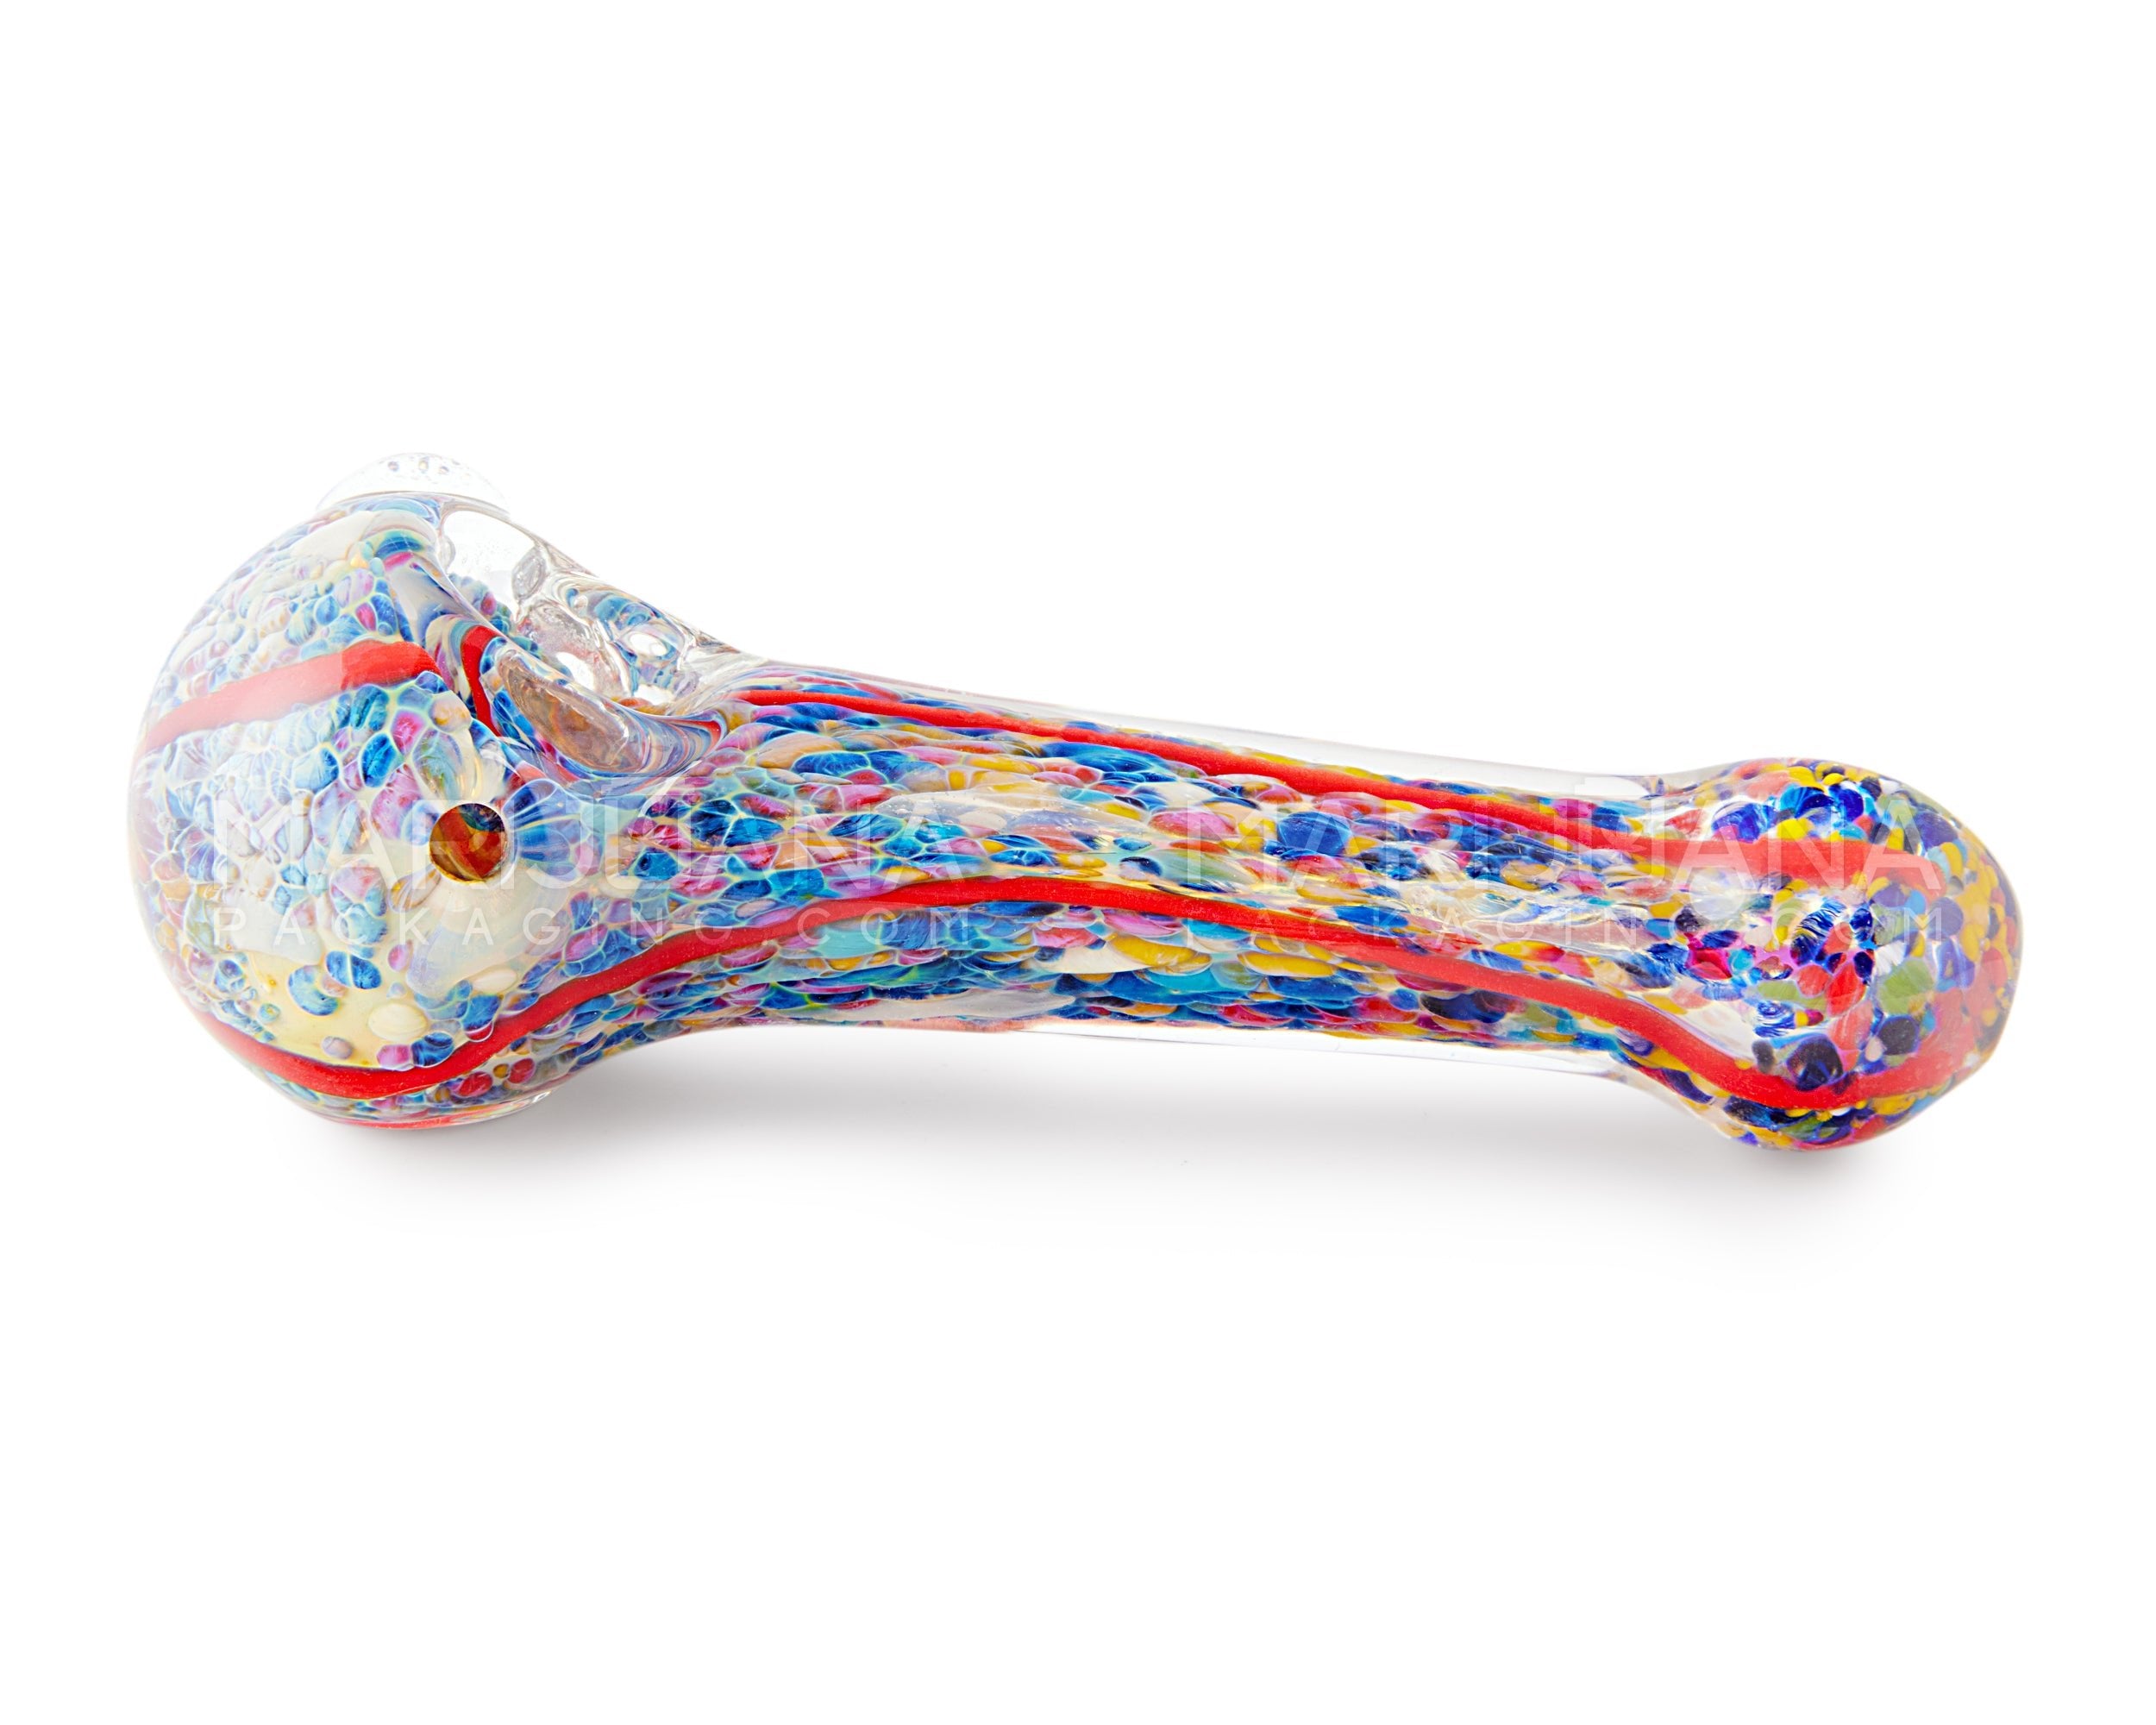 Frit & Fumed Striped Spoon Hand Pipe w/ Double Knockers | 5in Long - Glass - Assorted - 4